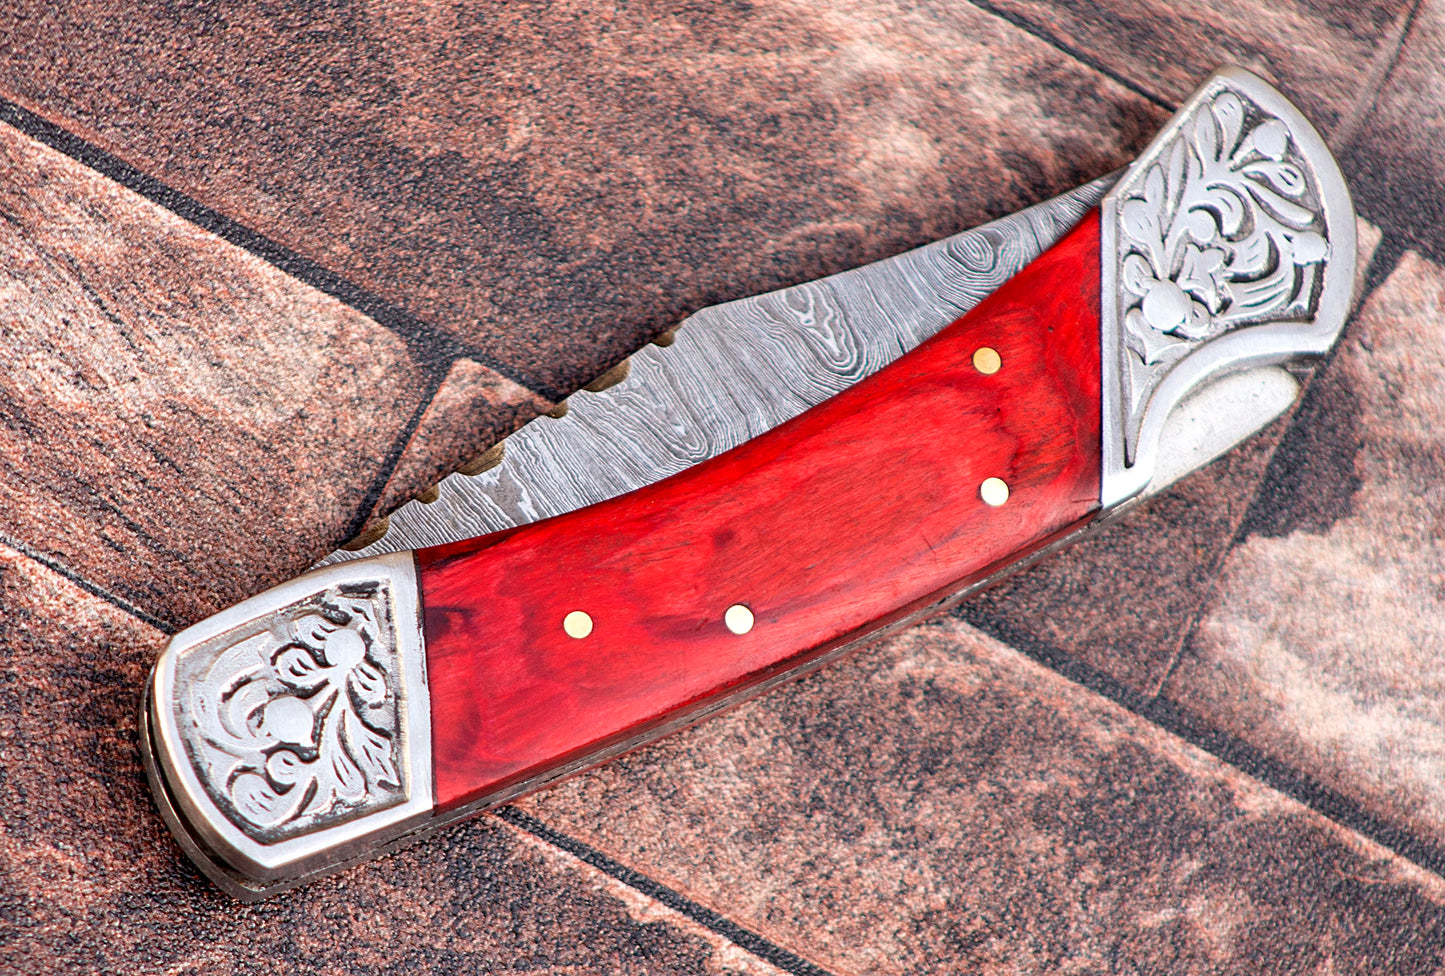 9" long back lock Folding Knife, 2 tone Red wood Scale with Engraved steel bolster, custom made 4" Hand Forged Damascus steel blade, Cow hide leather sheath with belt loop